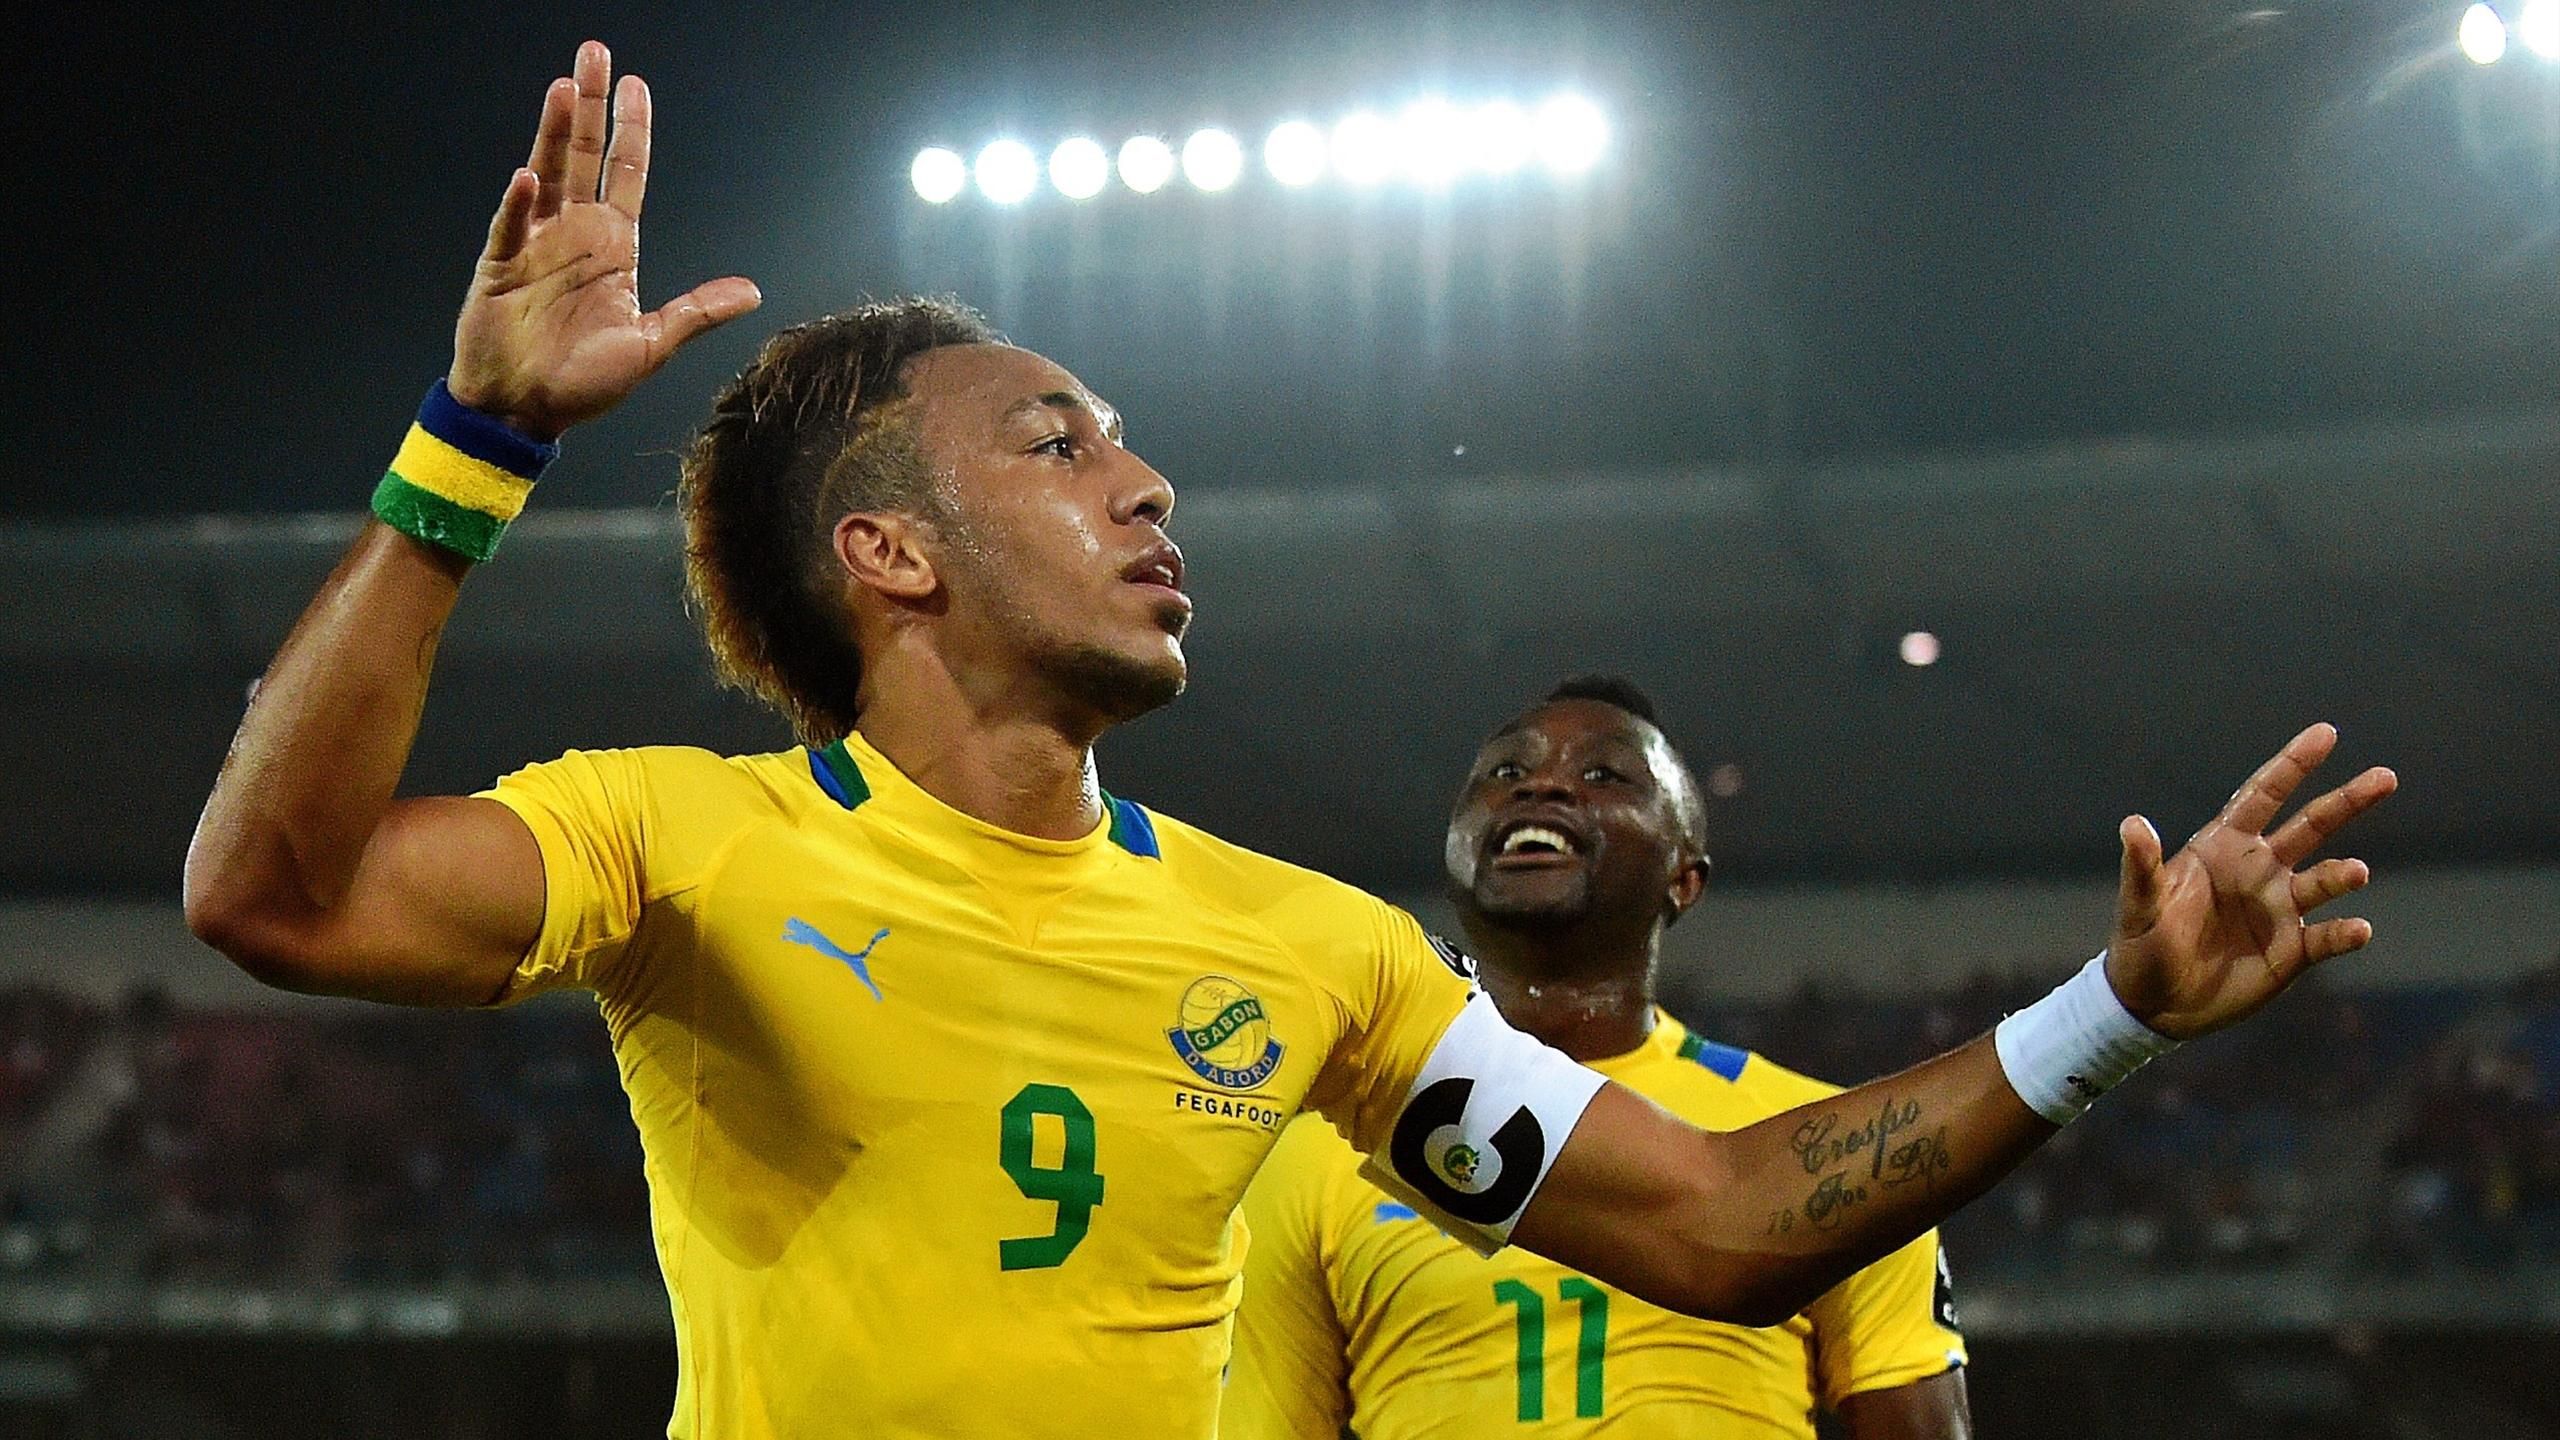 AFCON 2022: Pierre-Emerick Aubameyang returns to Arsenal after being one of the 3 Gabon players with heart issues after contracting COVID-19